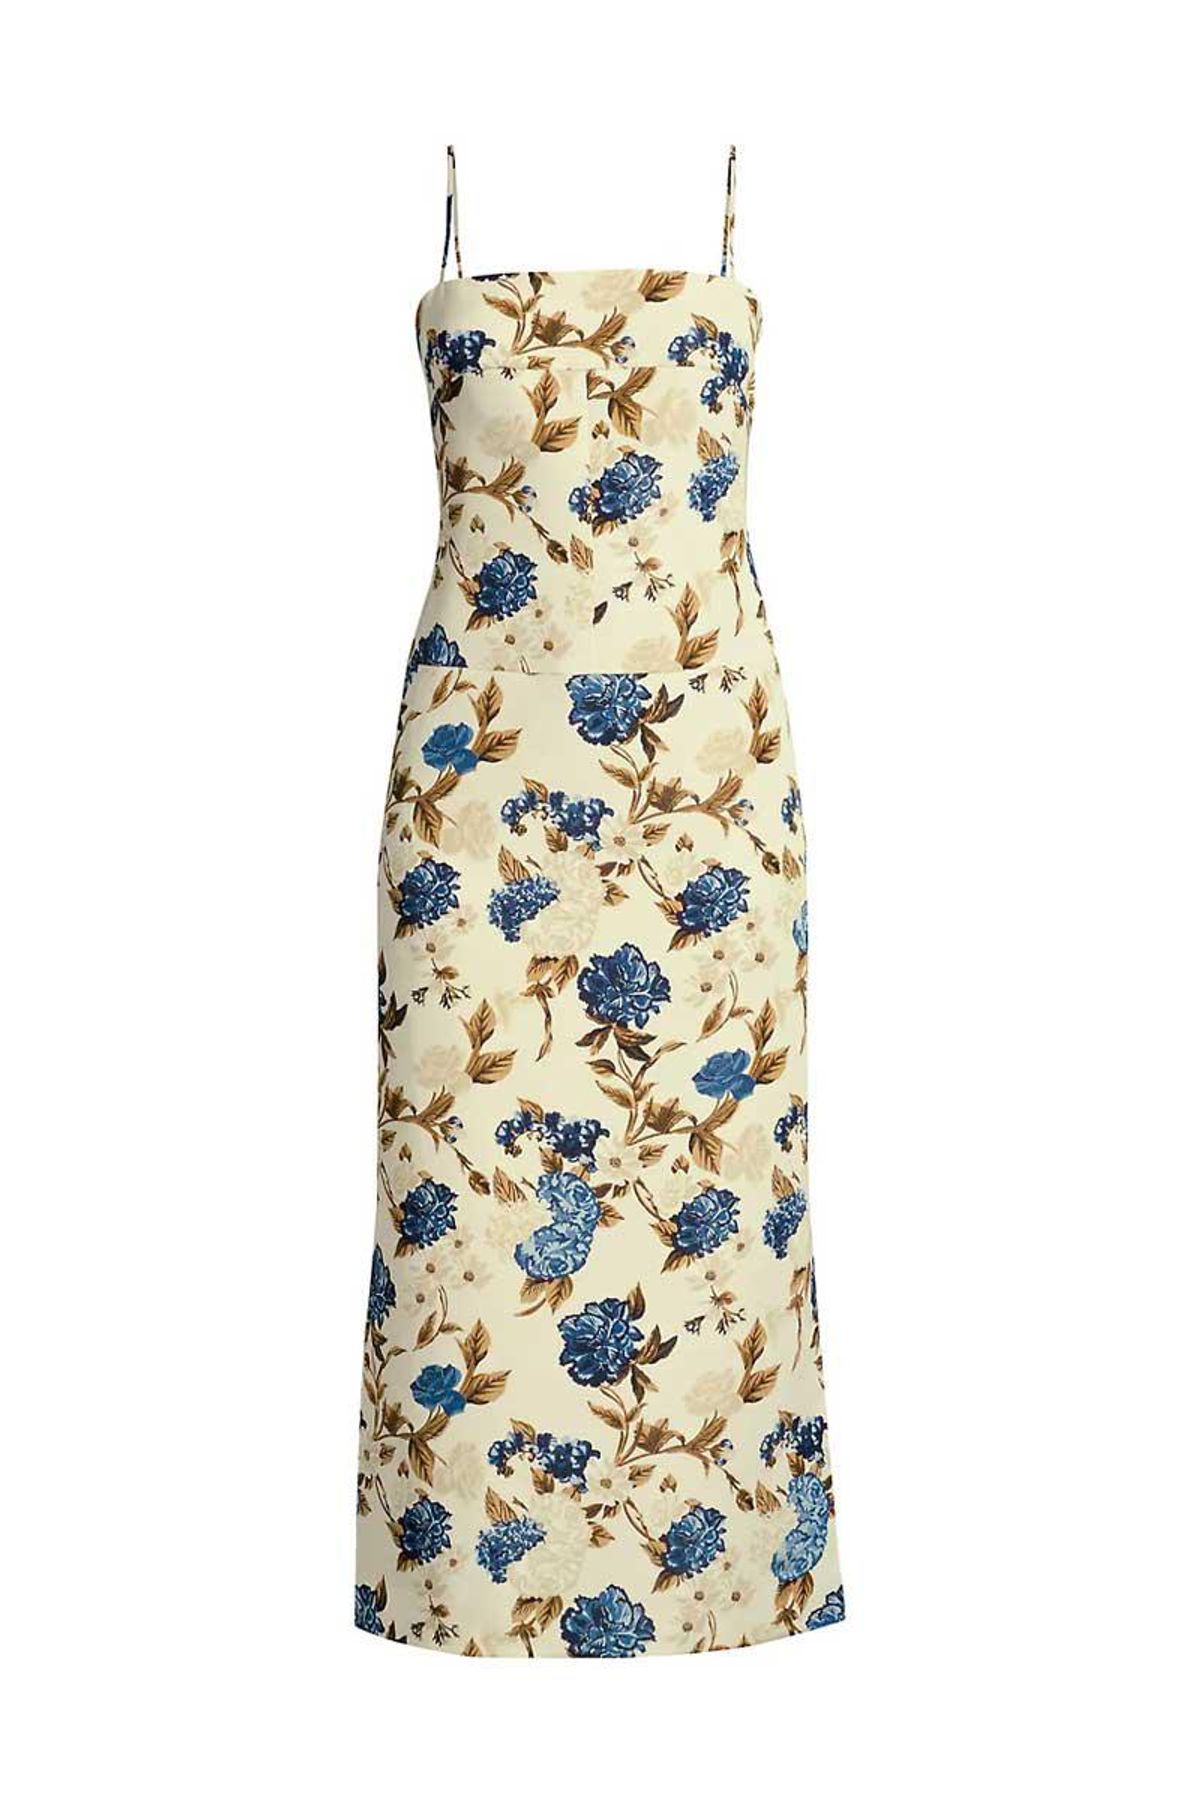 tory burch mixed floral strappy back midi dress